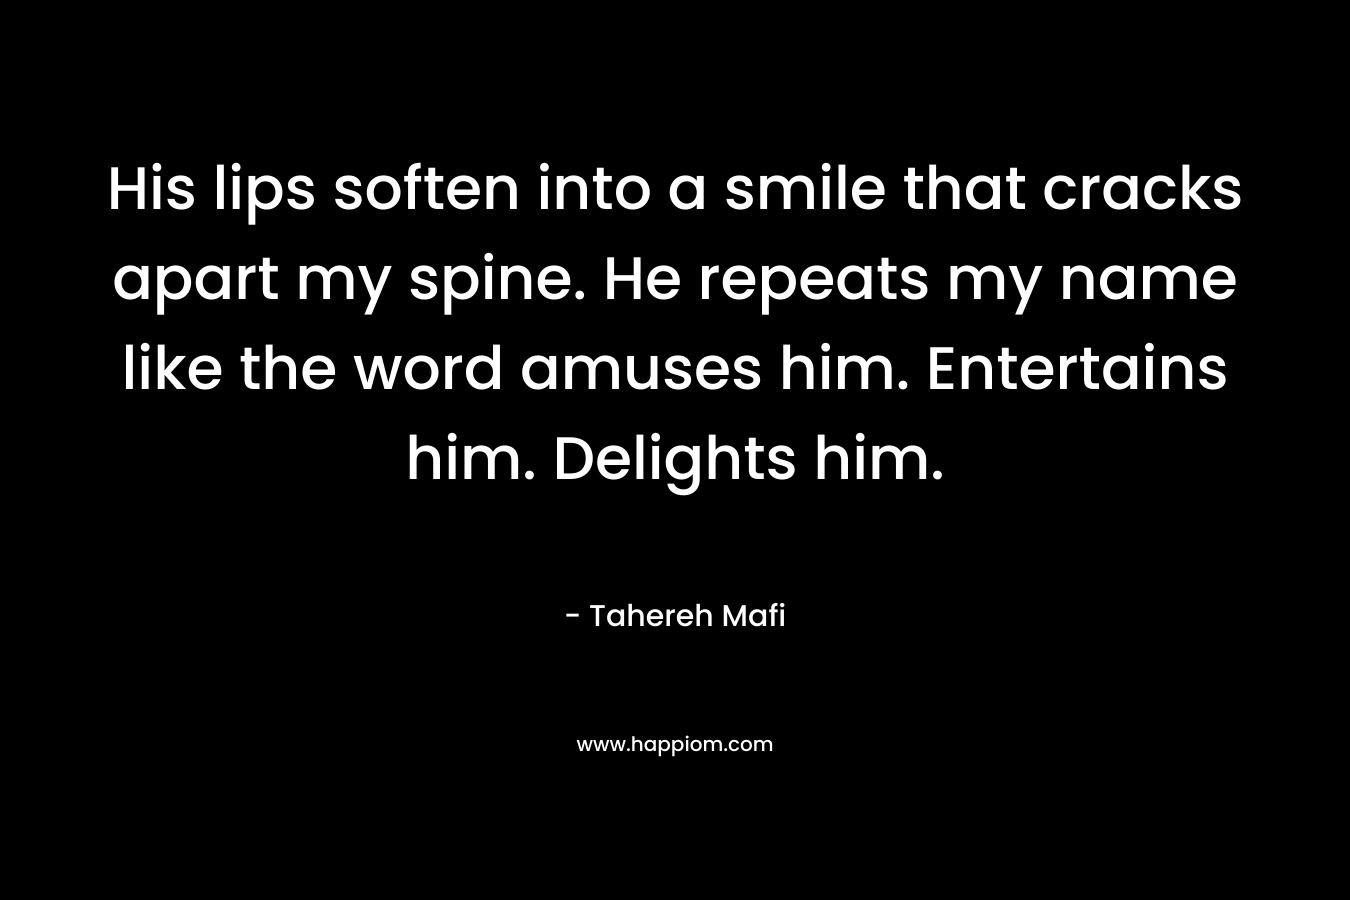 His lips soften into a smile that cracks apart my spine. He repeats my name like the word amuses him. Entertains him. Delights him. 